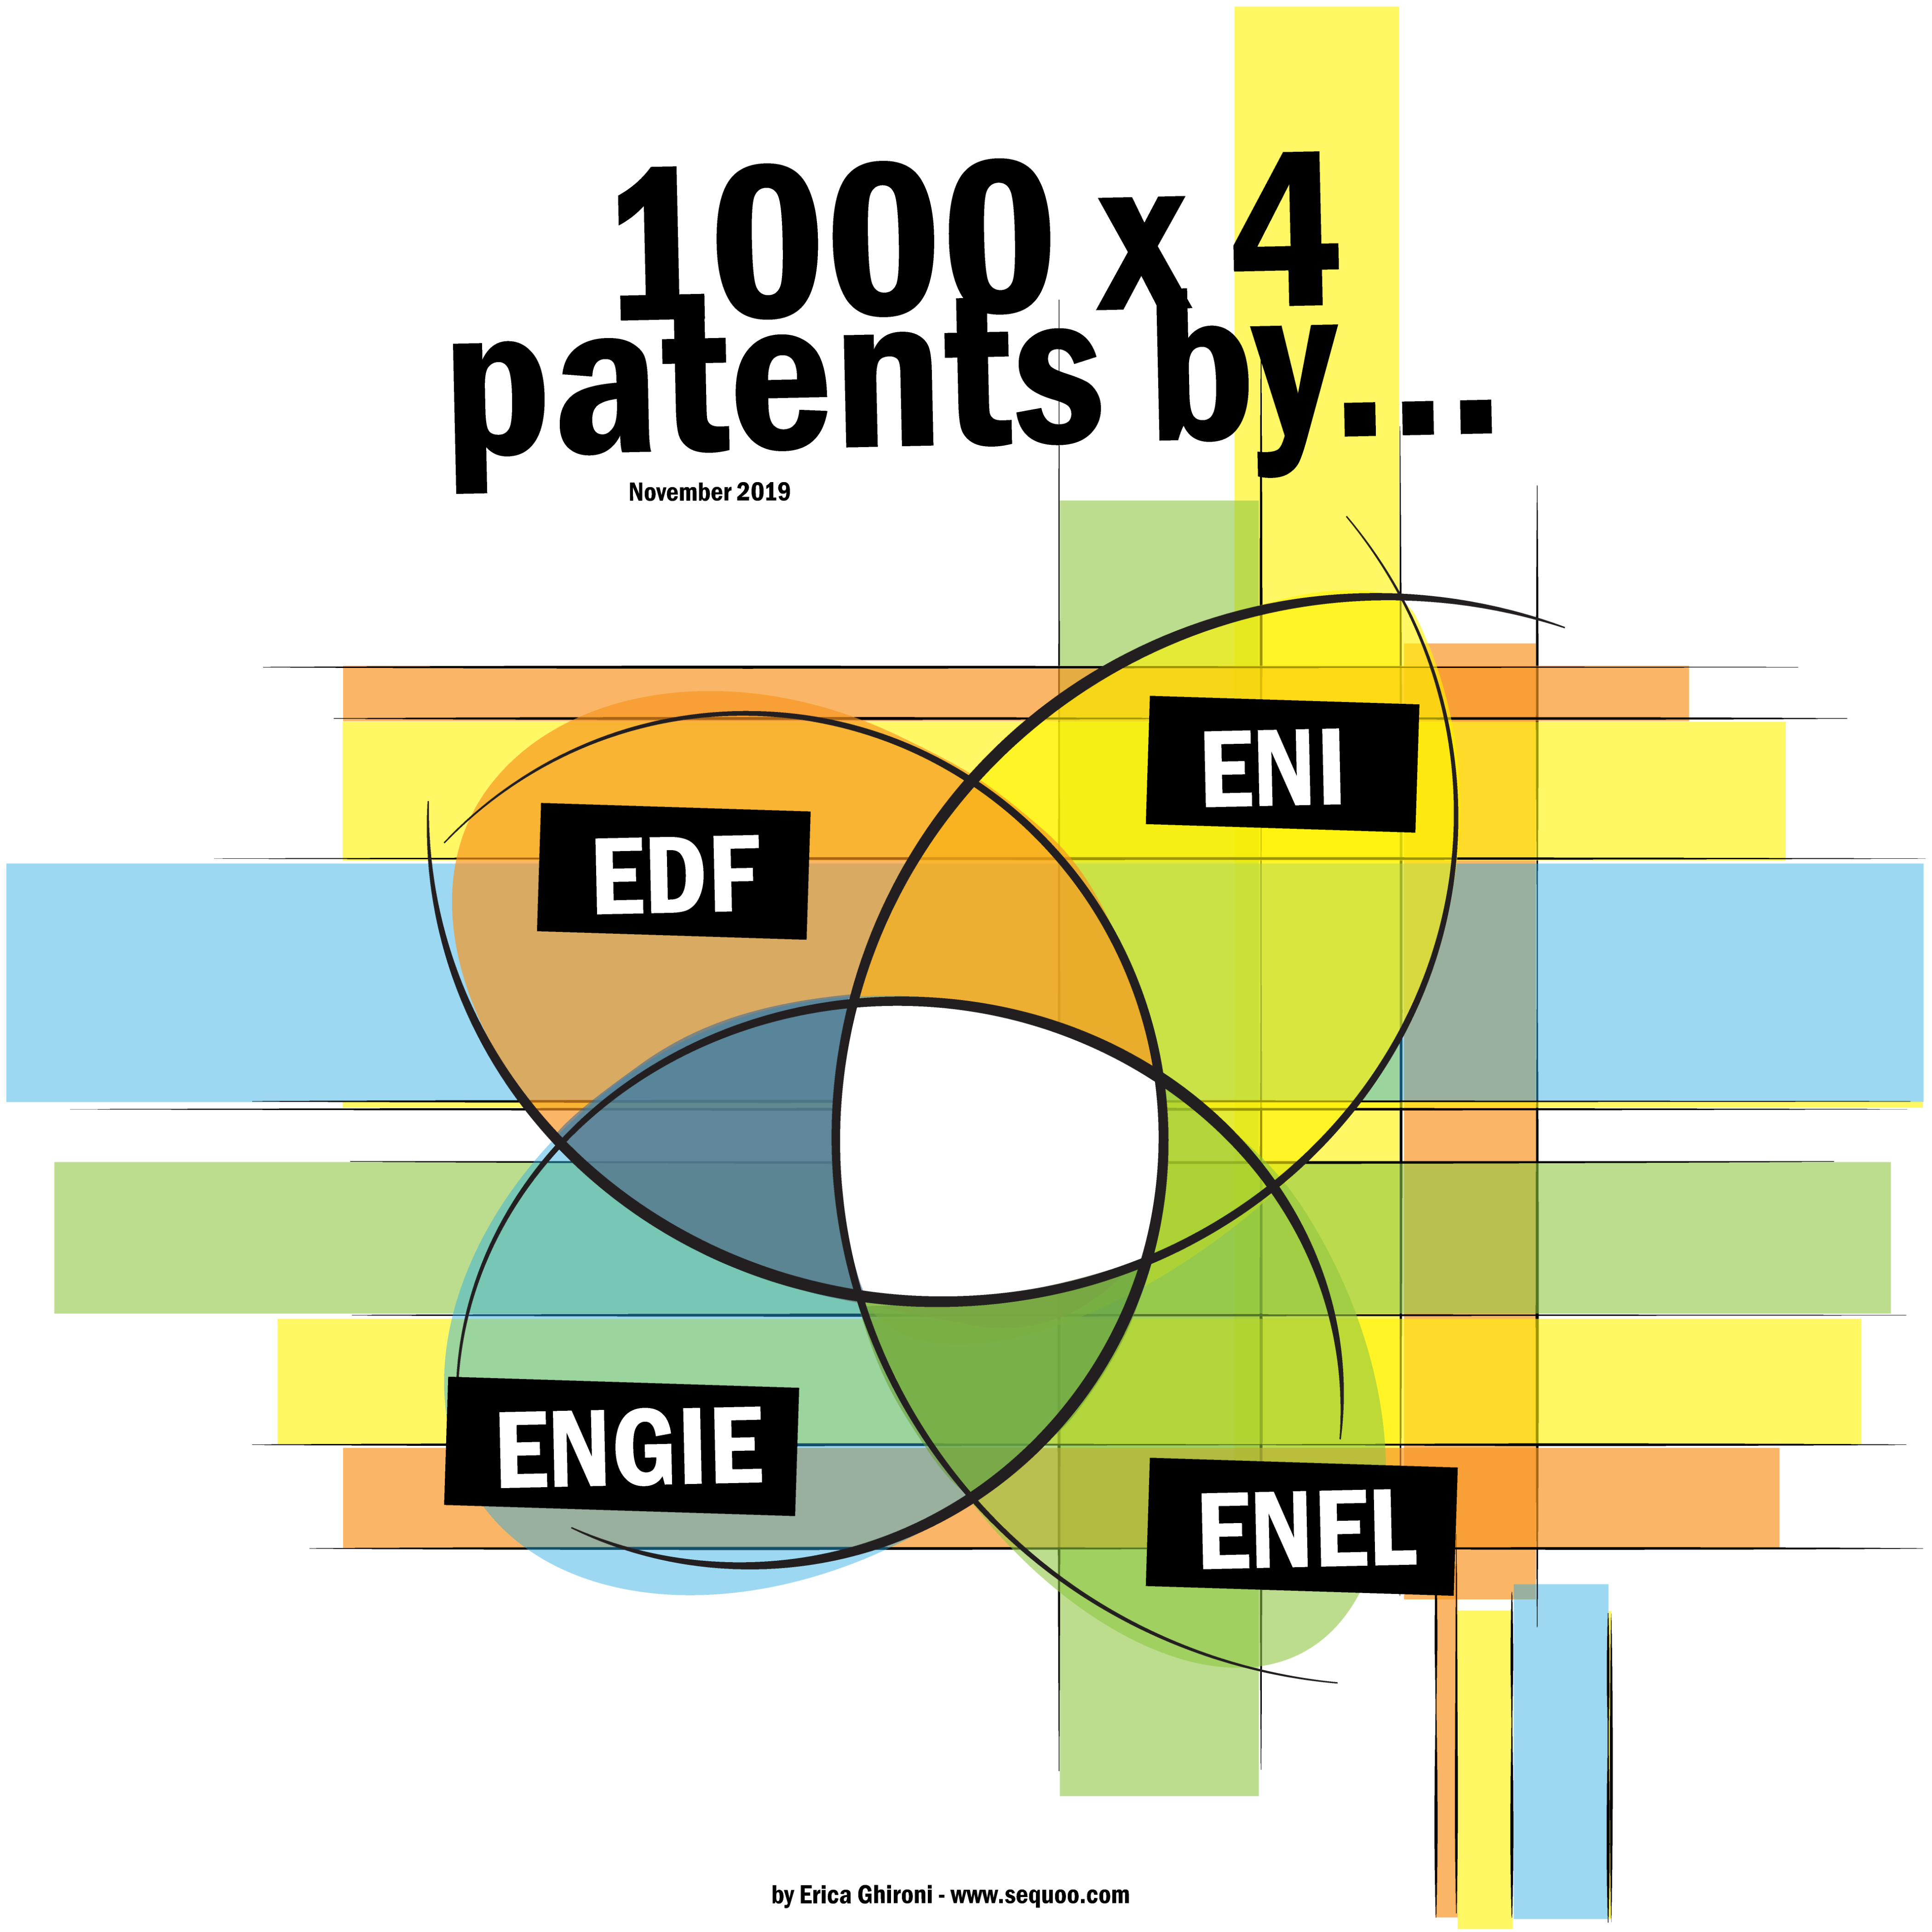 1000×4 patents by EDF, ENI, Engie and Enel